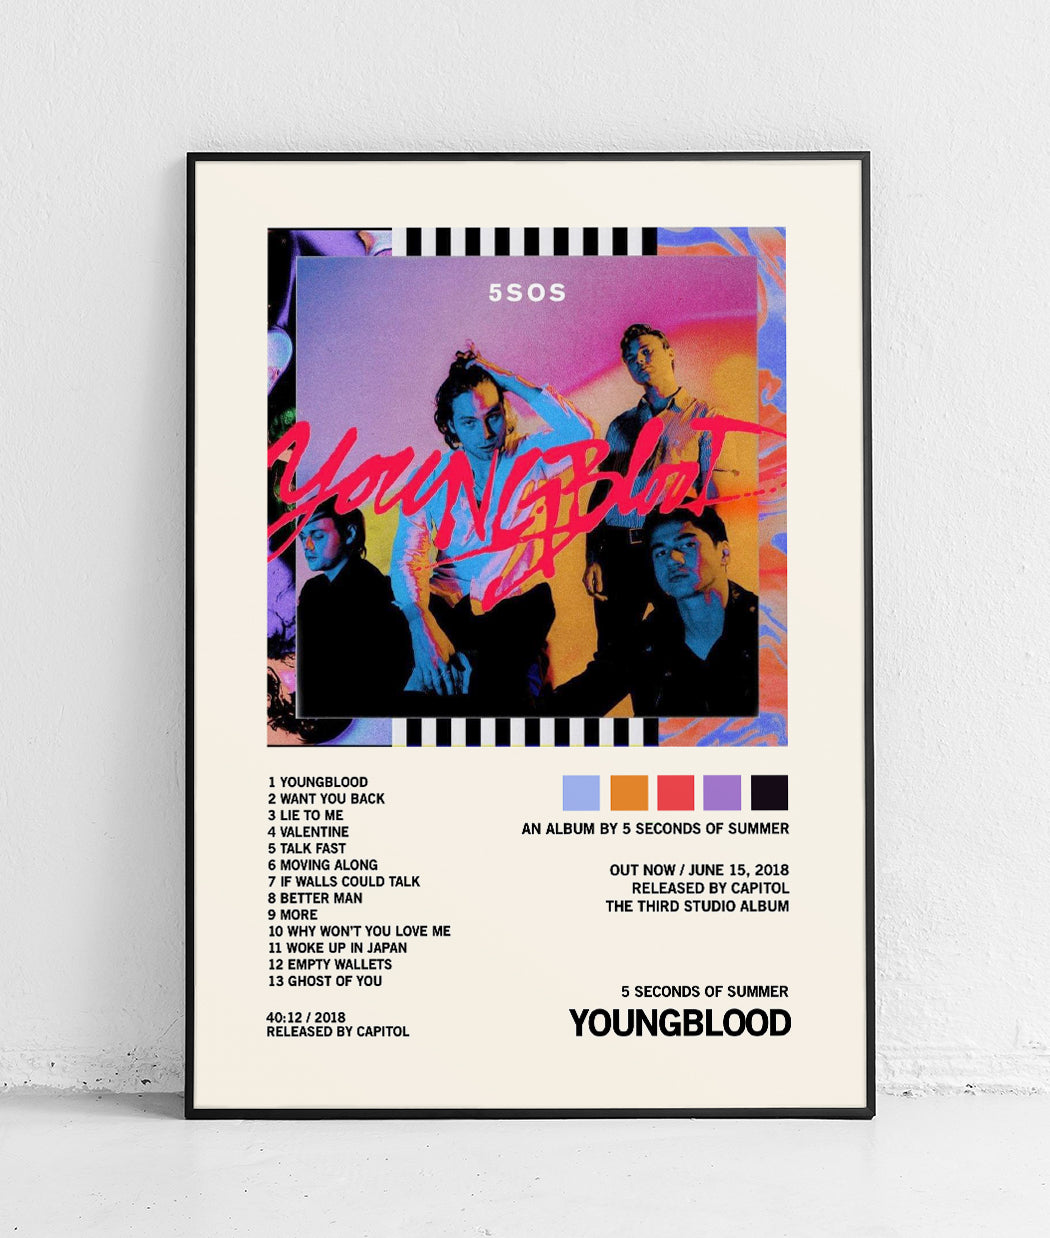 5 Seconds of Summer 'Youngblood' Tracklist Poster